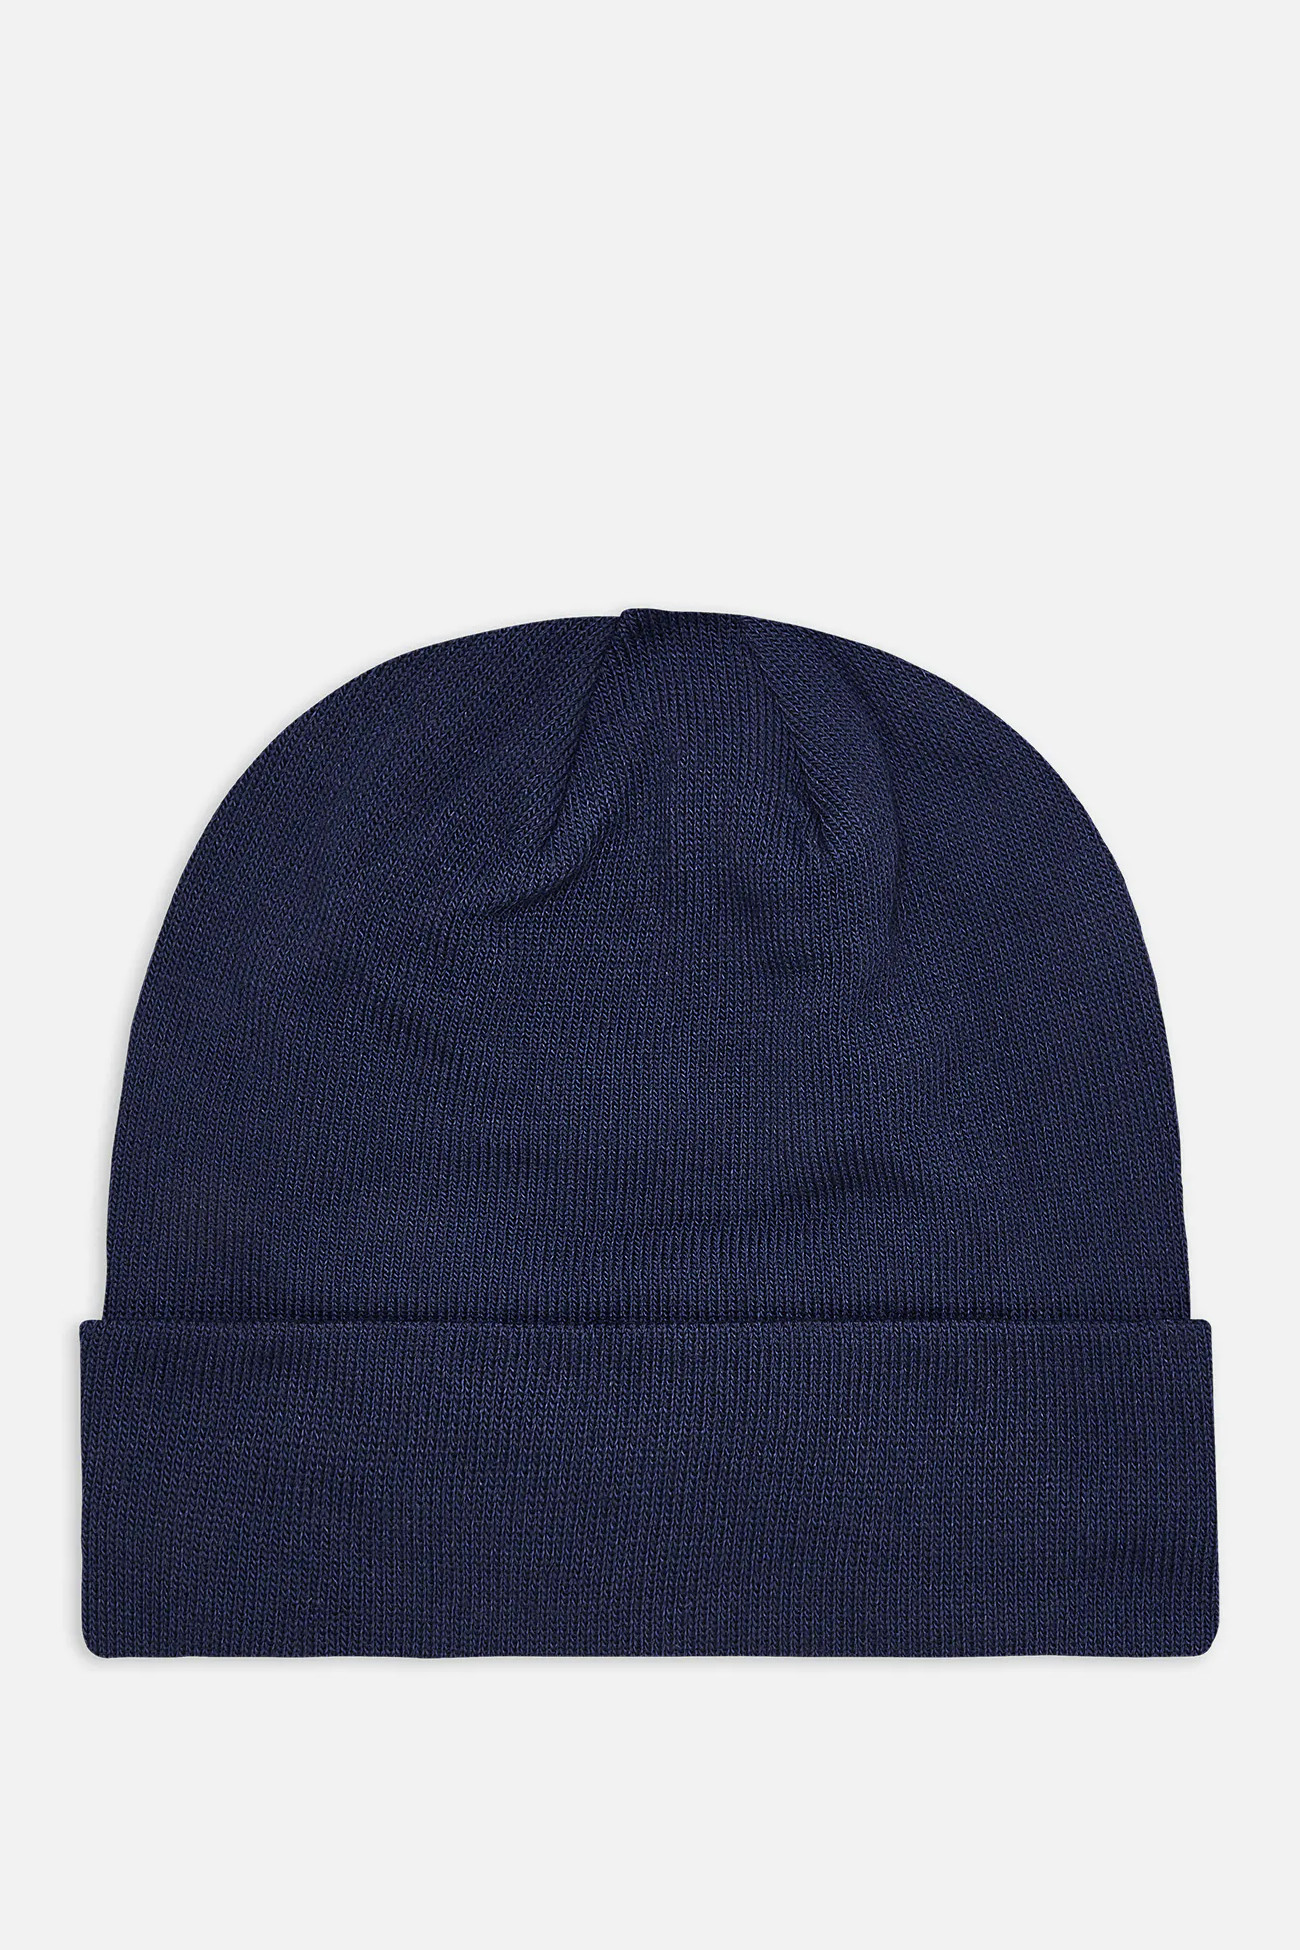 The North Face NF0A3FNT8K21 Шапка унісекс DOCK WORKER RECYCLED BEANIE изображение 3